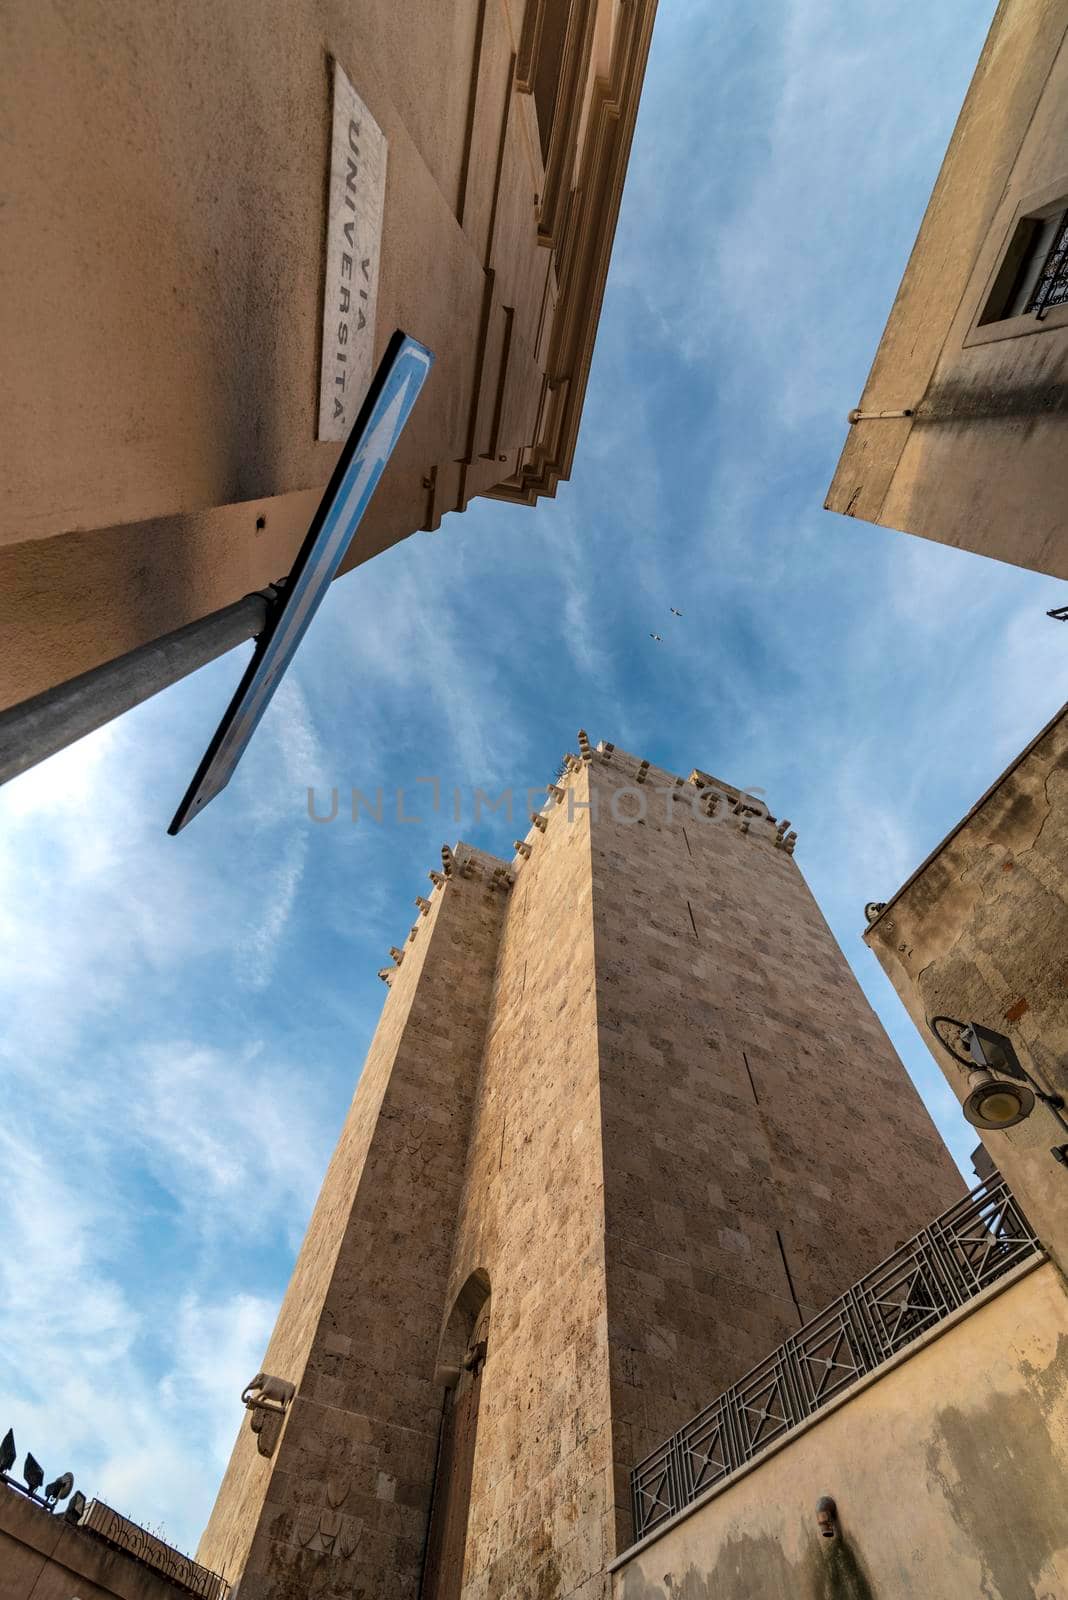 The Elephant Tower is the second highest medieval tower in Cagliari. by osmar01